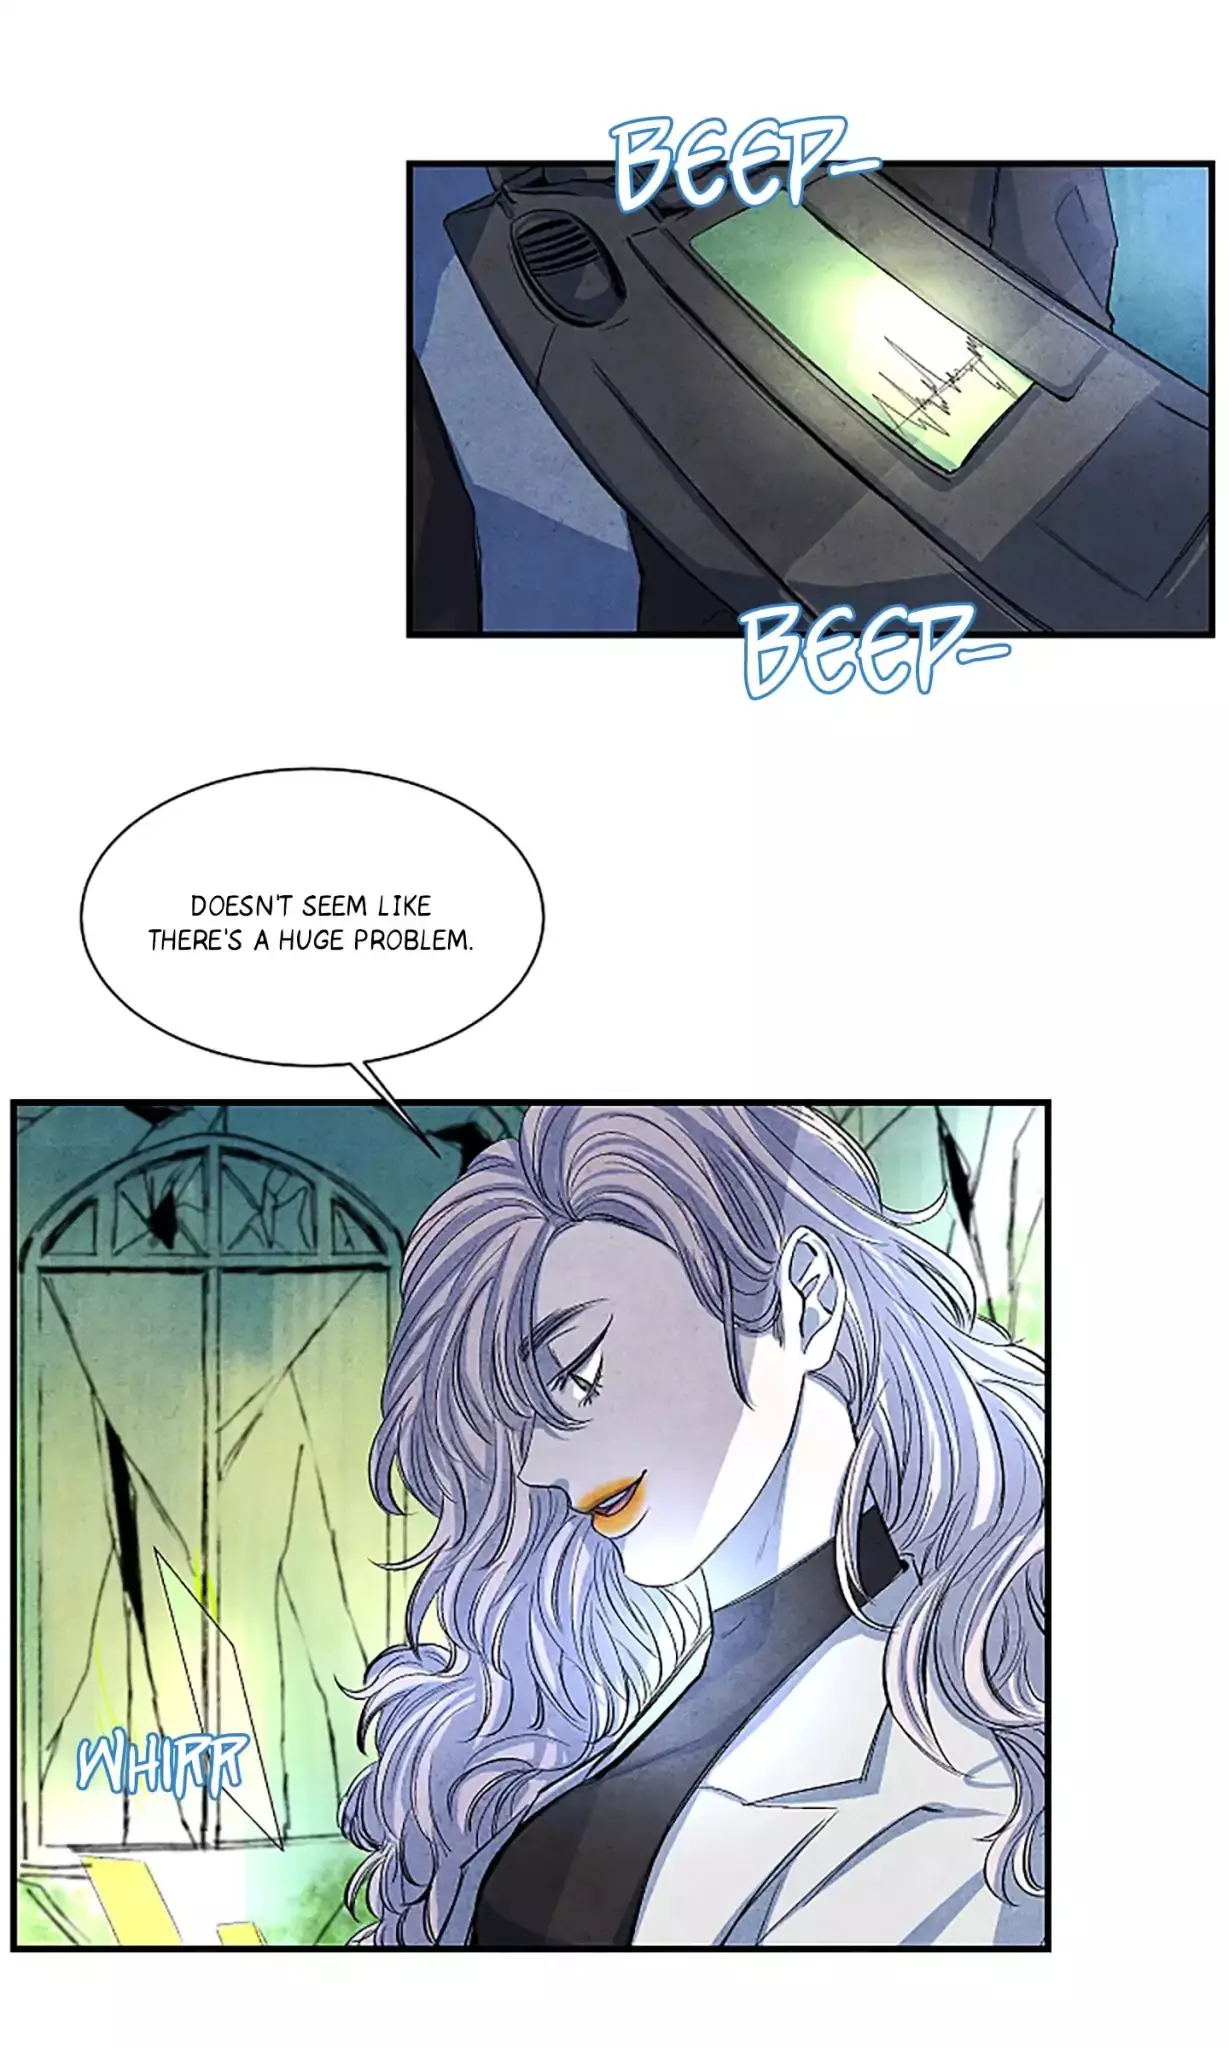 When The Star Sleeps - 5 page 4-4e4a2a7d